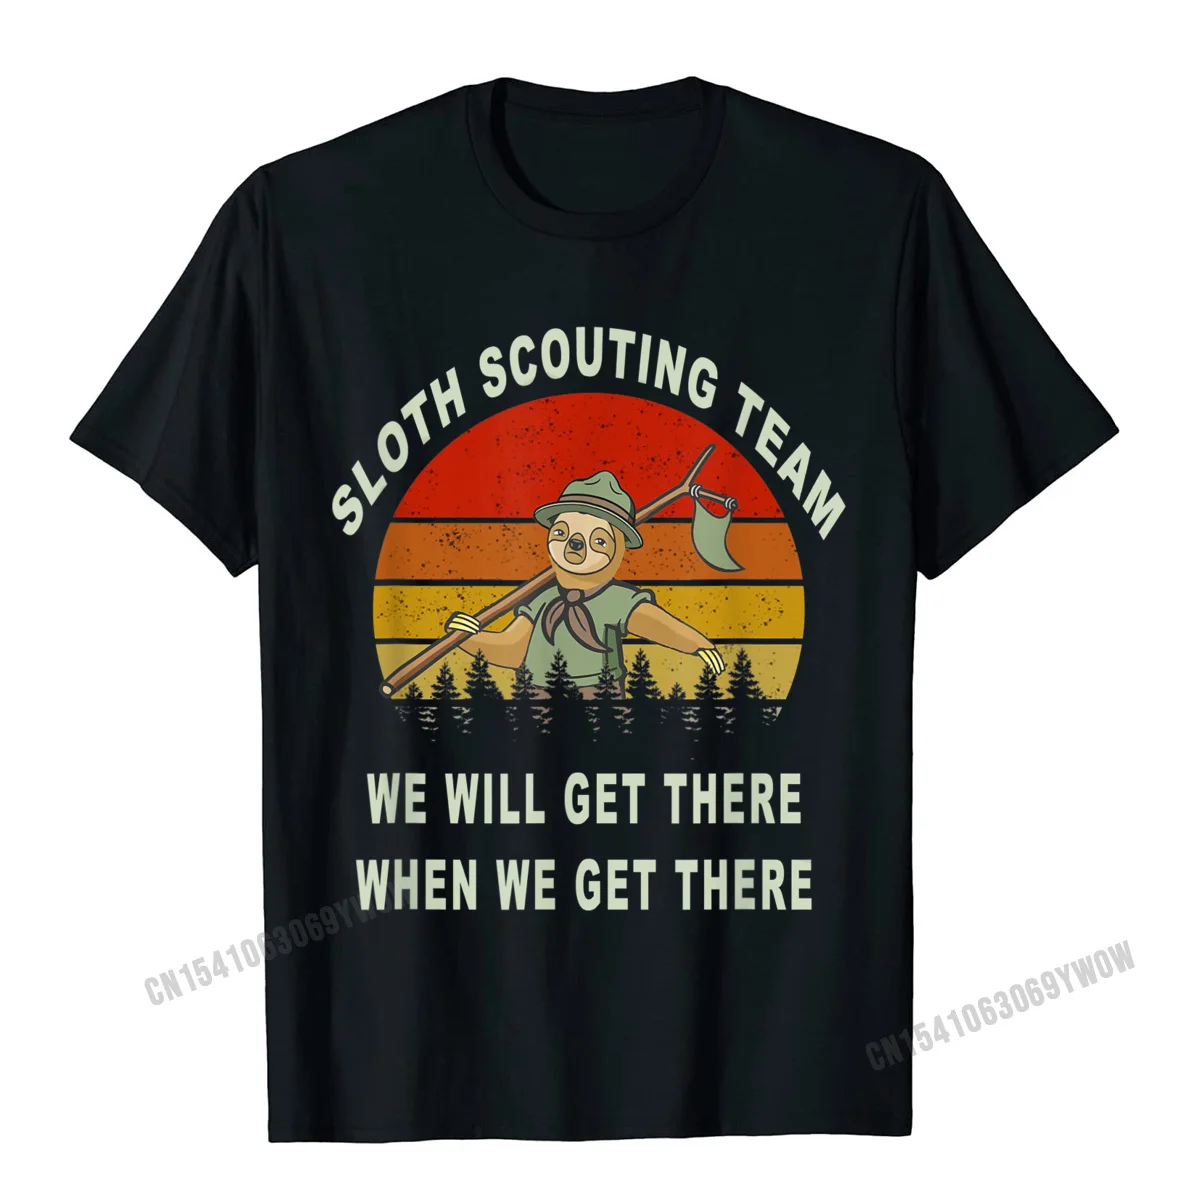 Sloth Scouting Team Camping Scout Hiking Vintage Flag T-Shirt Camisas Men Top T-Shirts Fitness Tight Fitted T Shirt Cool For Men